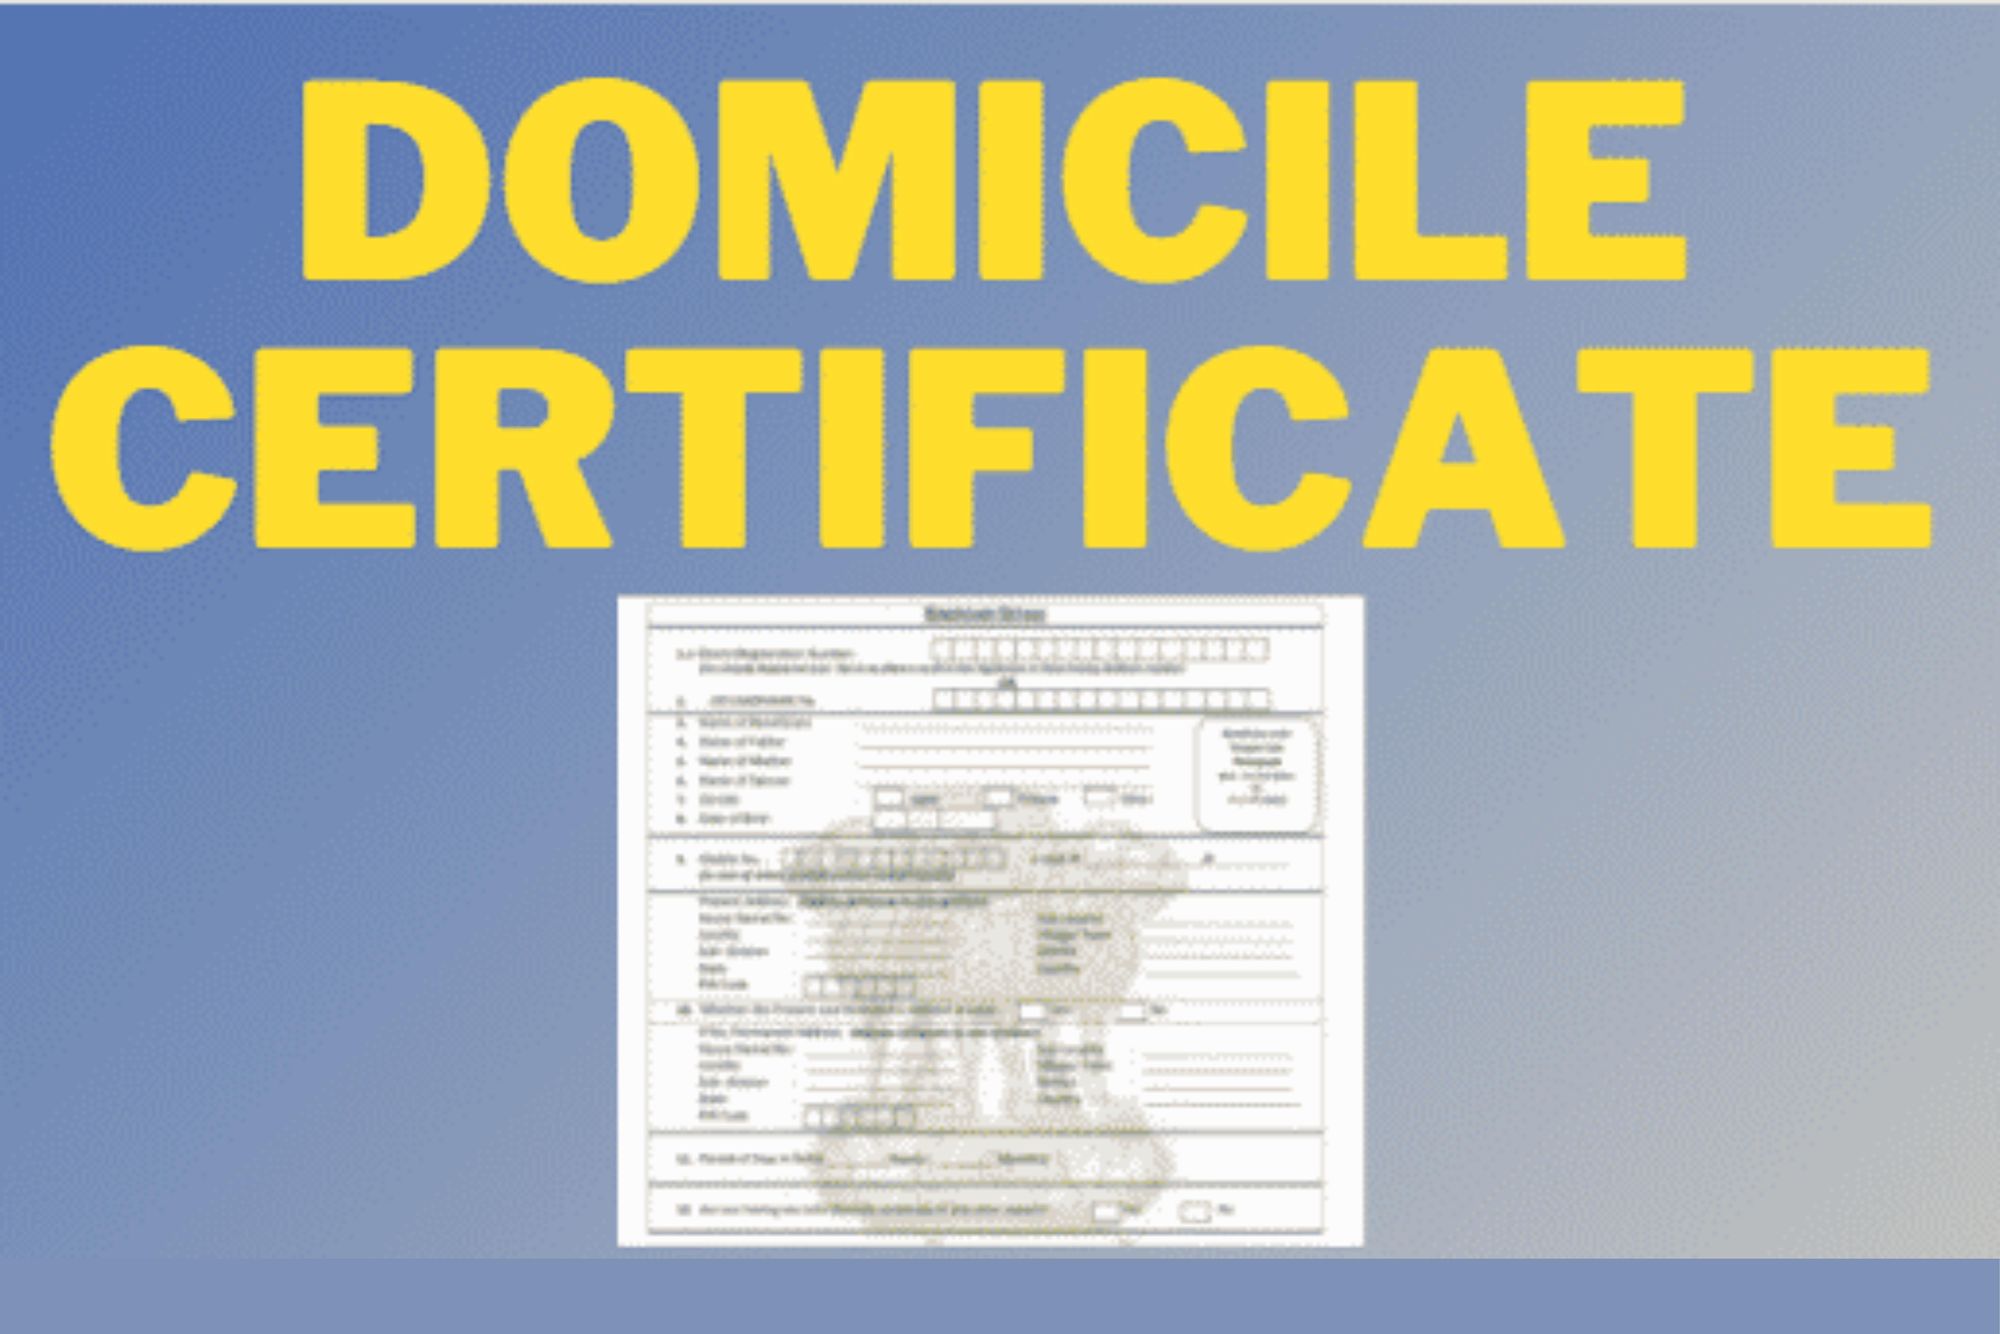 How To Apply For Domicile Certificate Online?